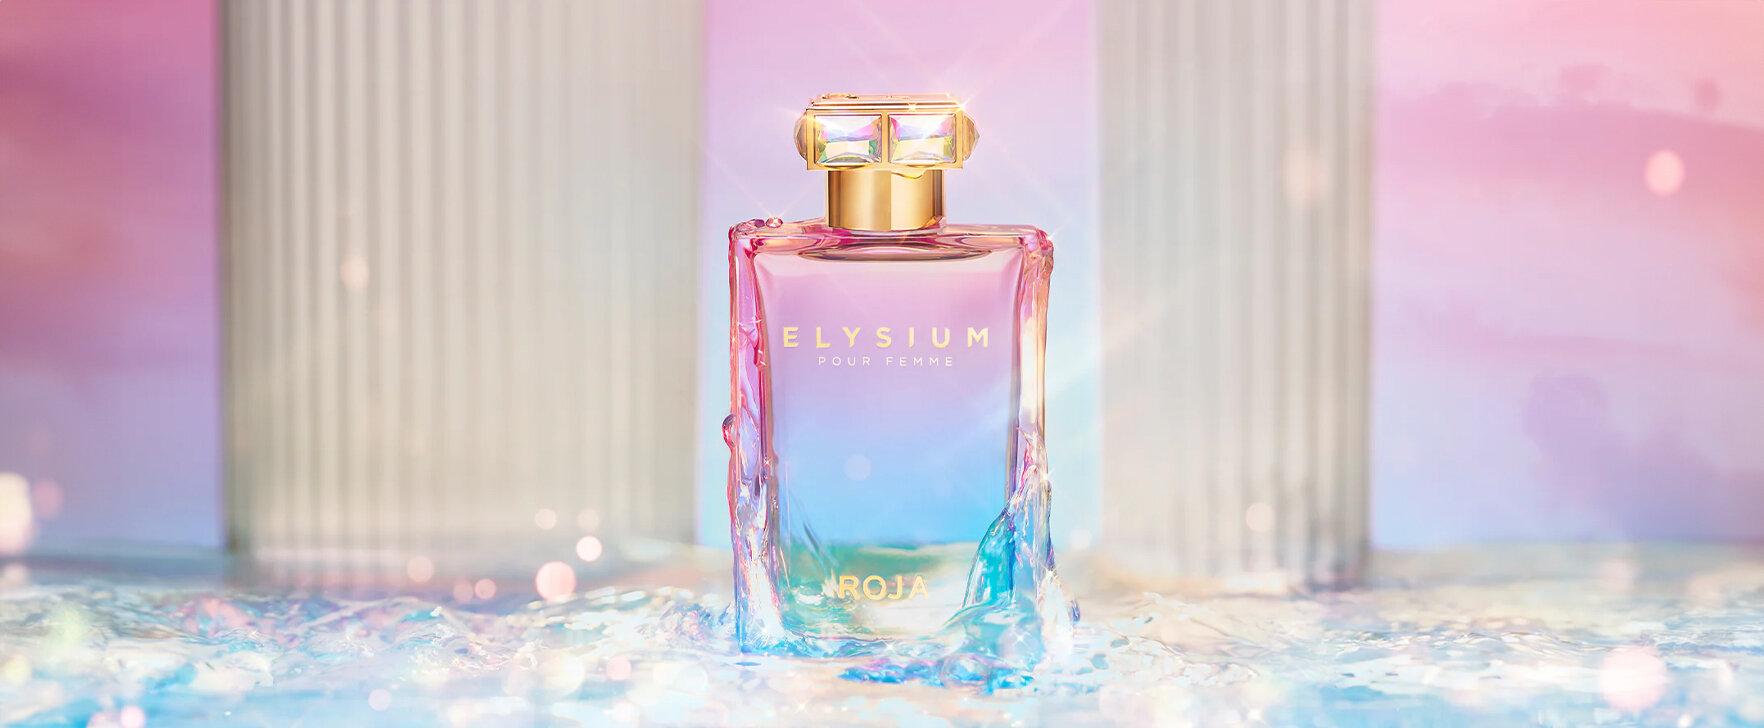 Inspired by Strength and Independence: The New Eau de Parfum "Elysium Pour Femme" by Roja Parfums